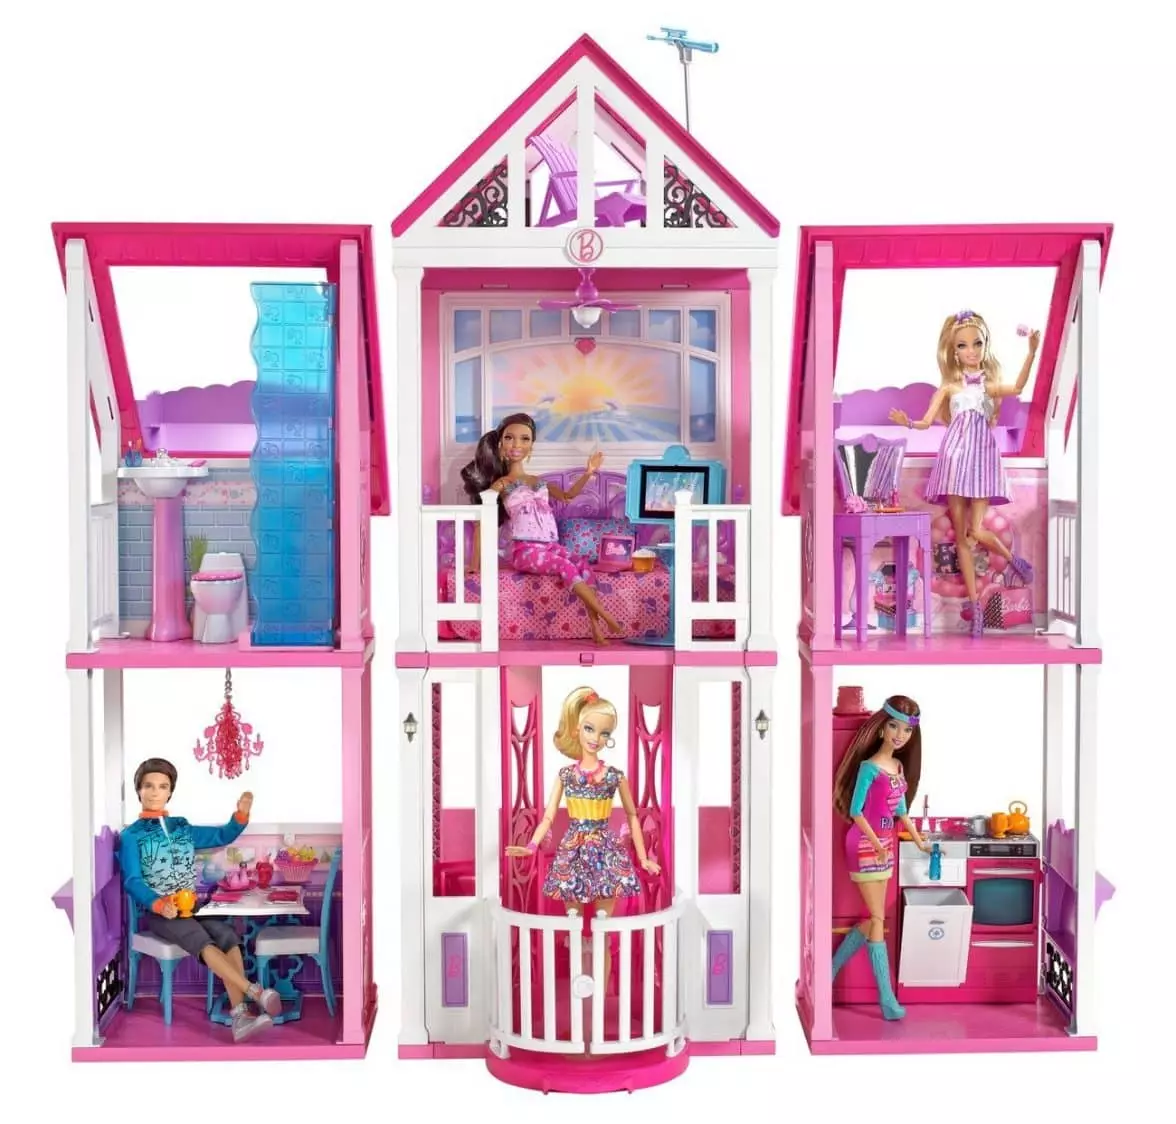 The mansion is based on the original Barbie Malibu Dreamhouse toy. (